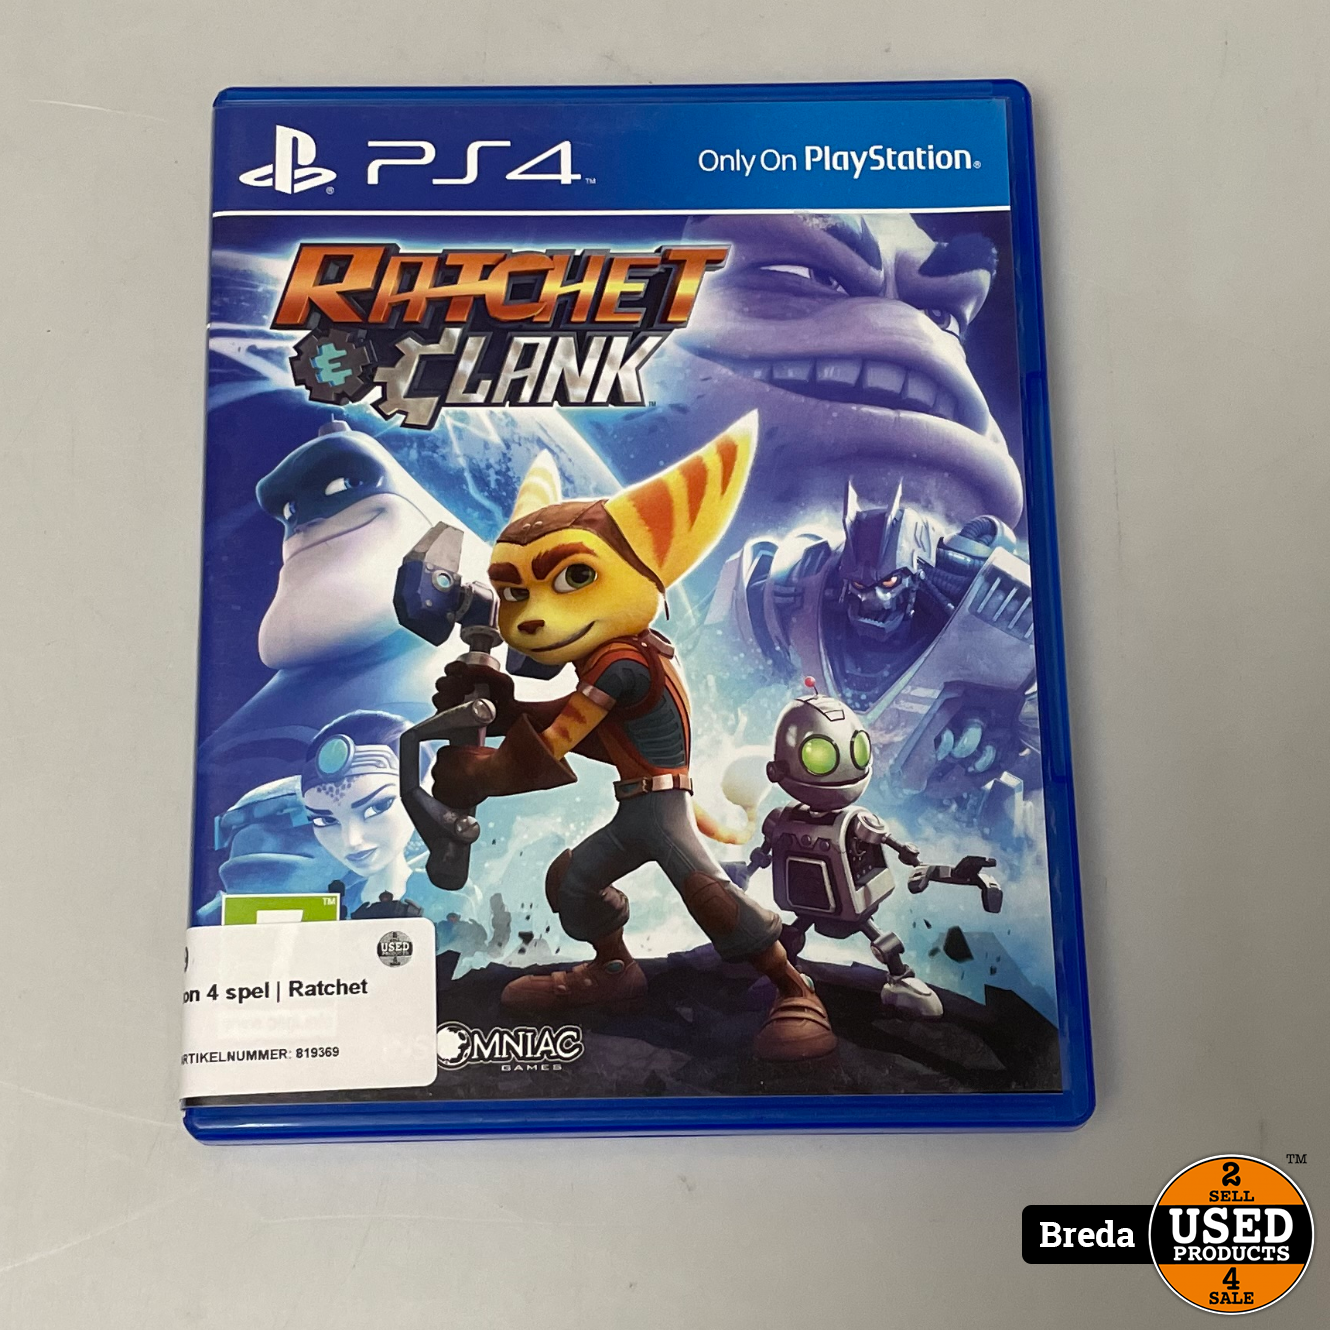 Playstation 4 spel Clank - Used Products Breda